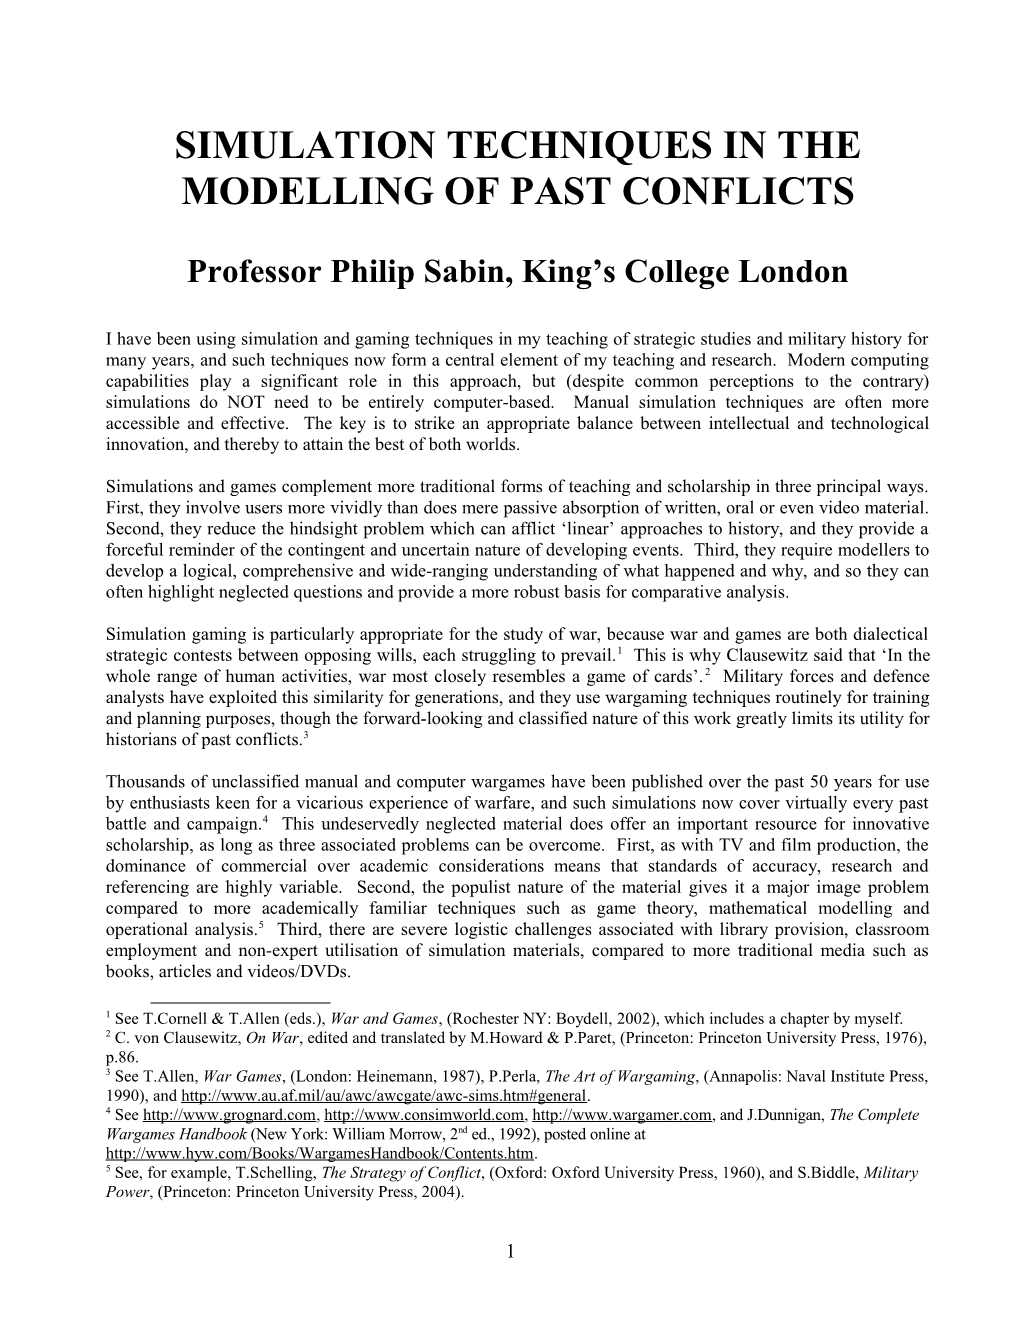 Simulation Techniques in the Modelling of Past Conflicts